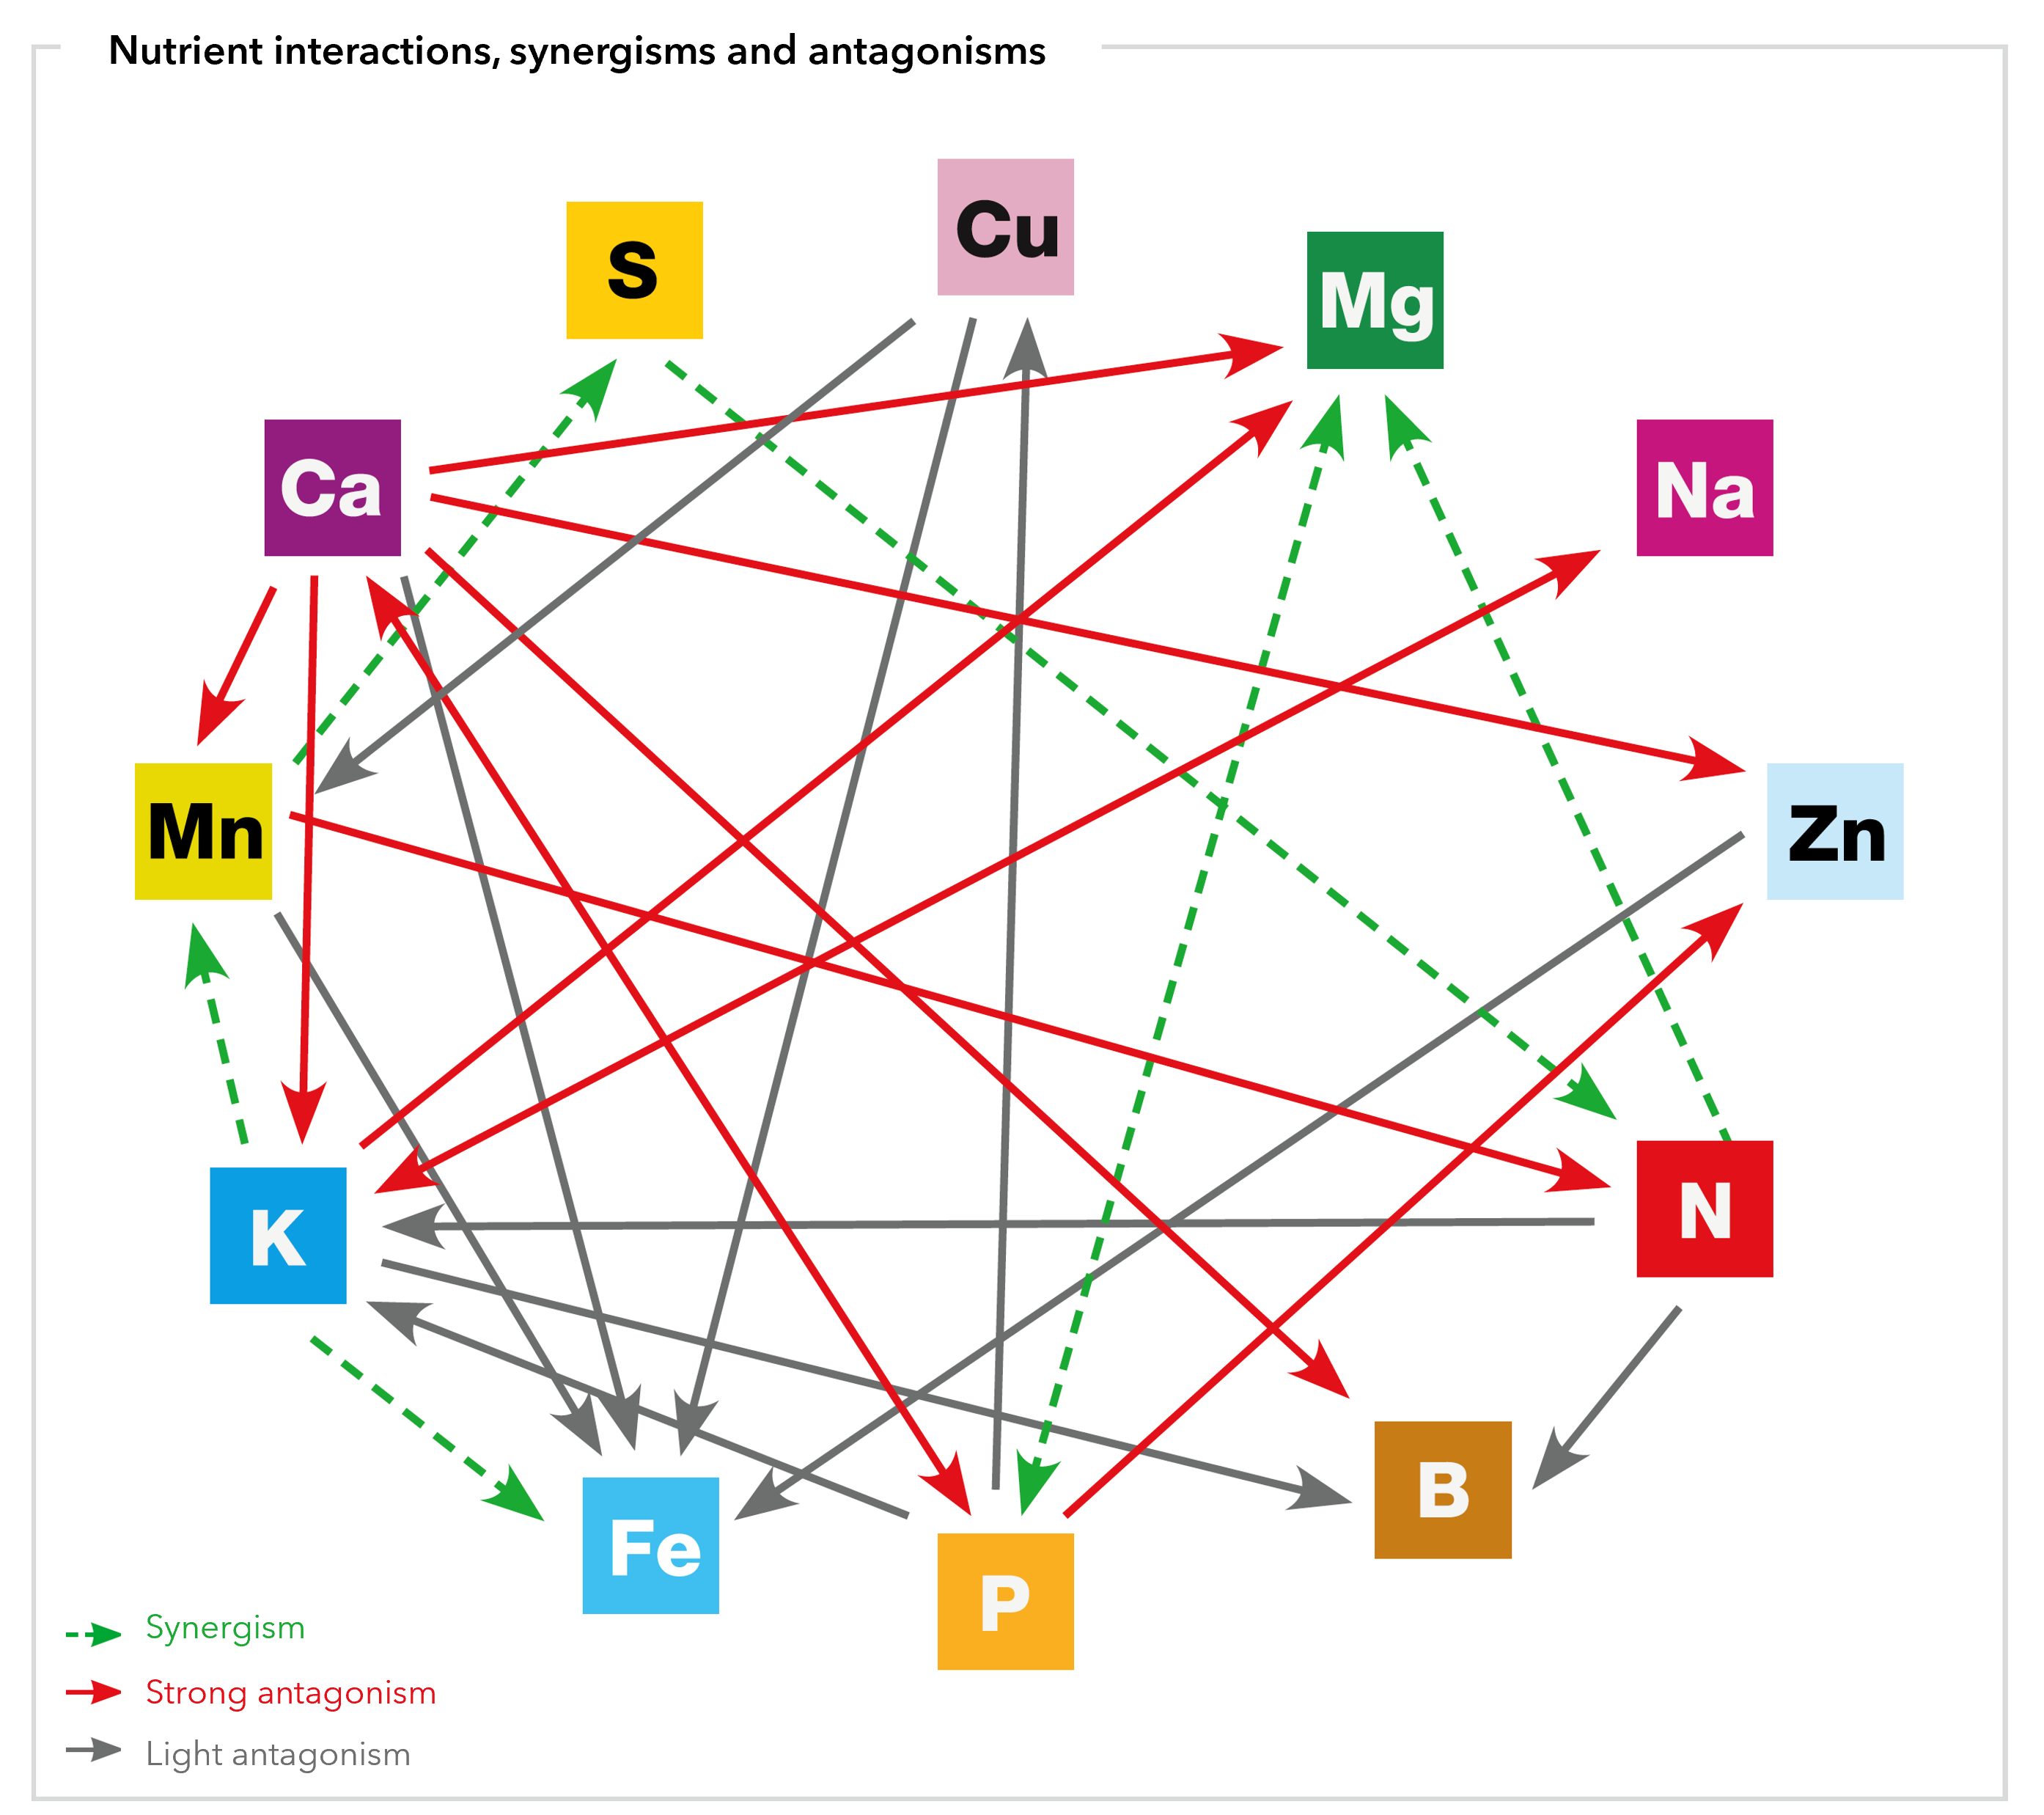 Nutrient interactions with s